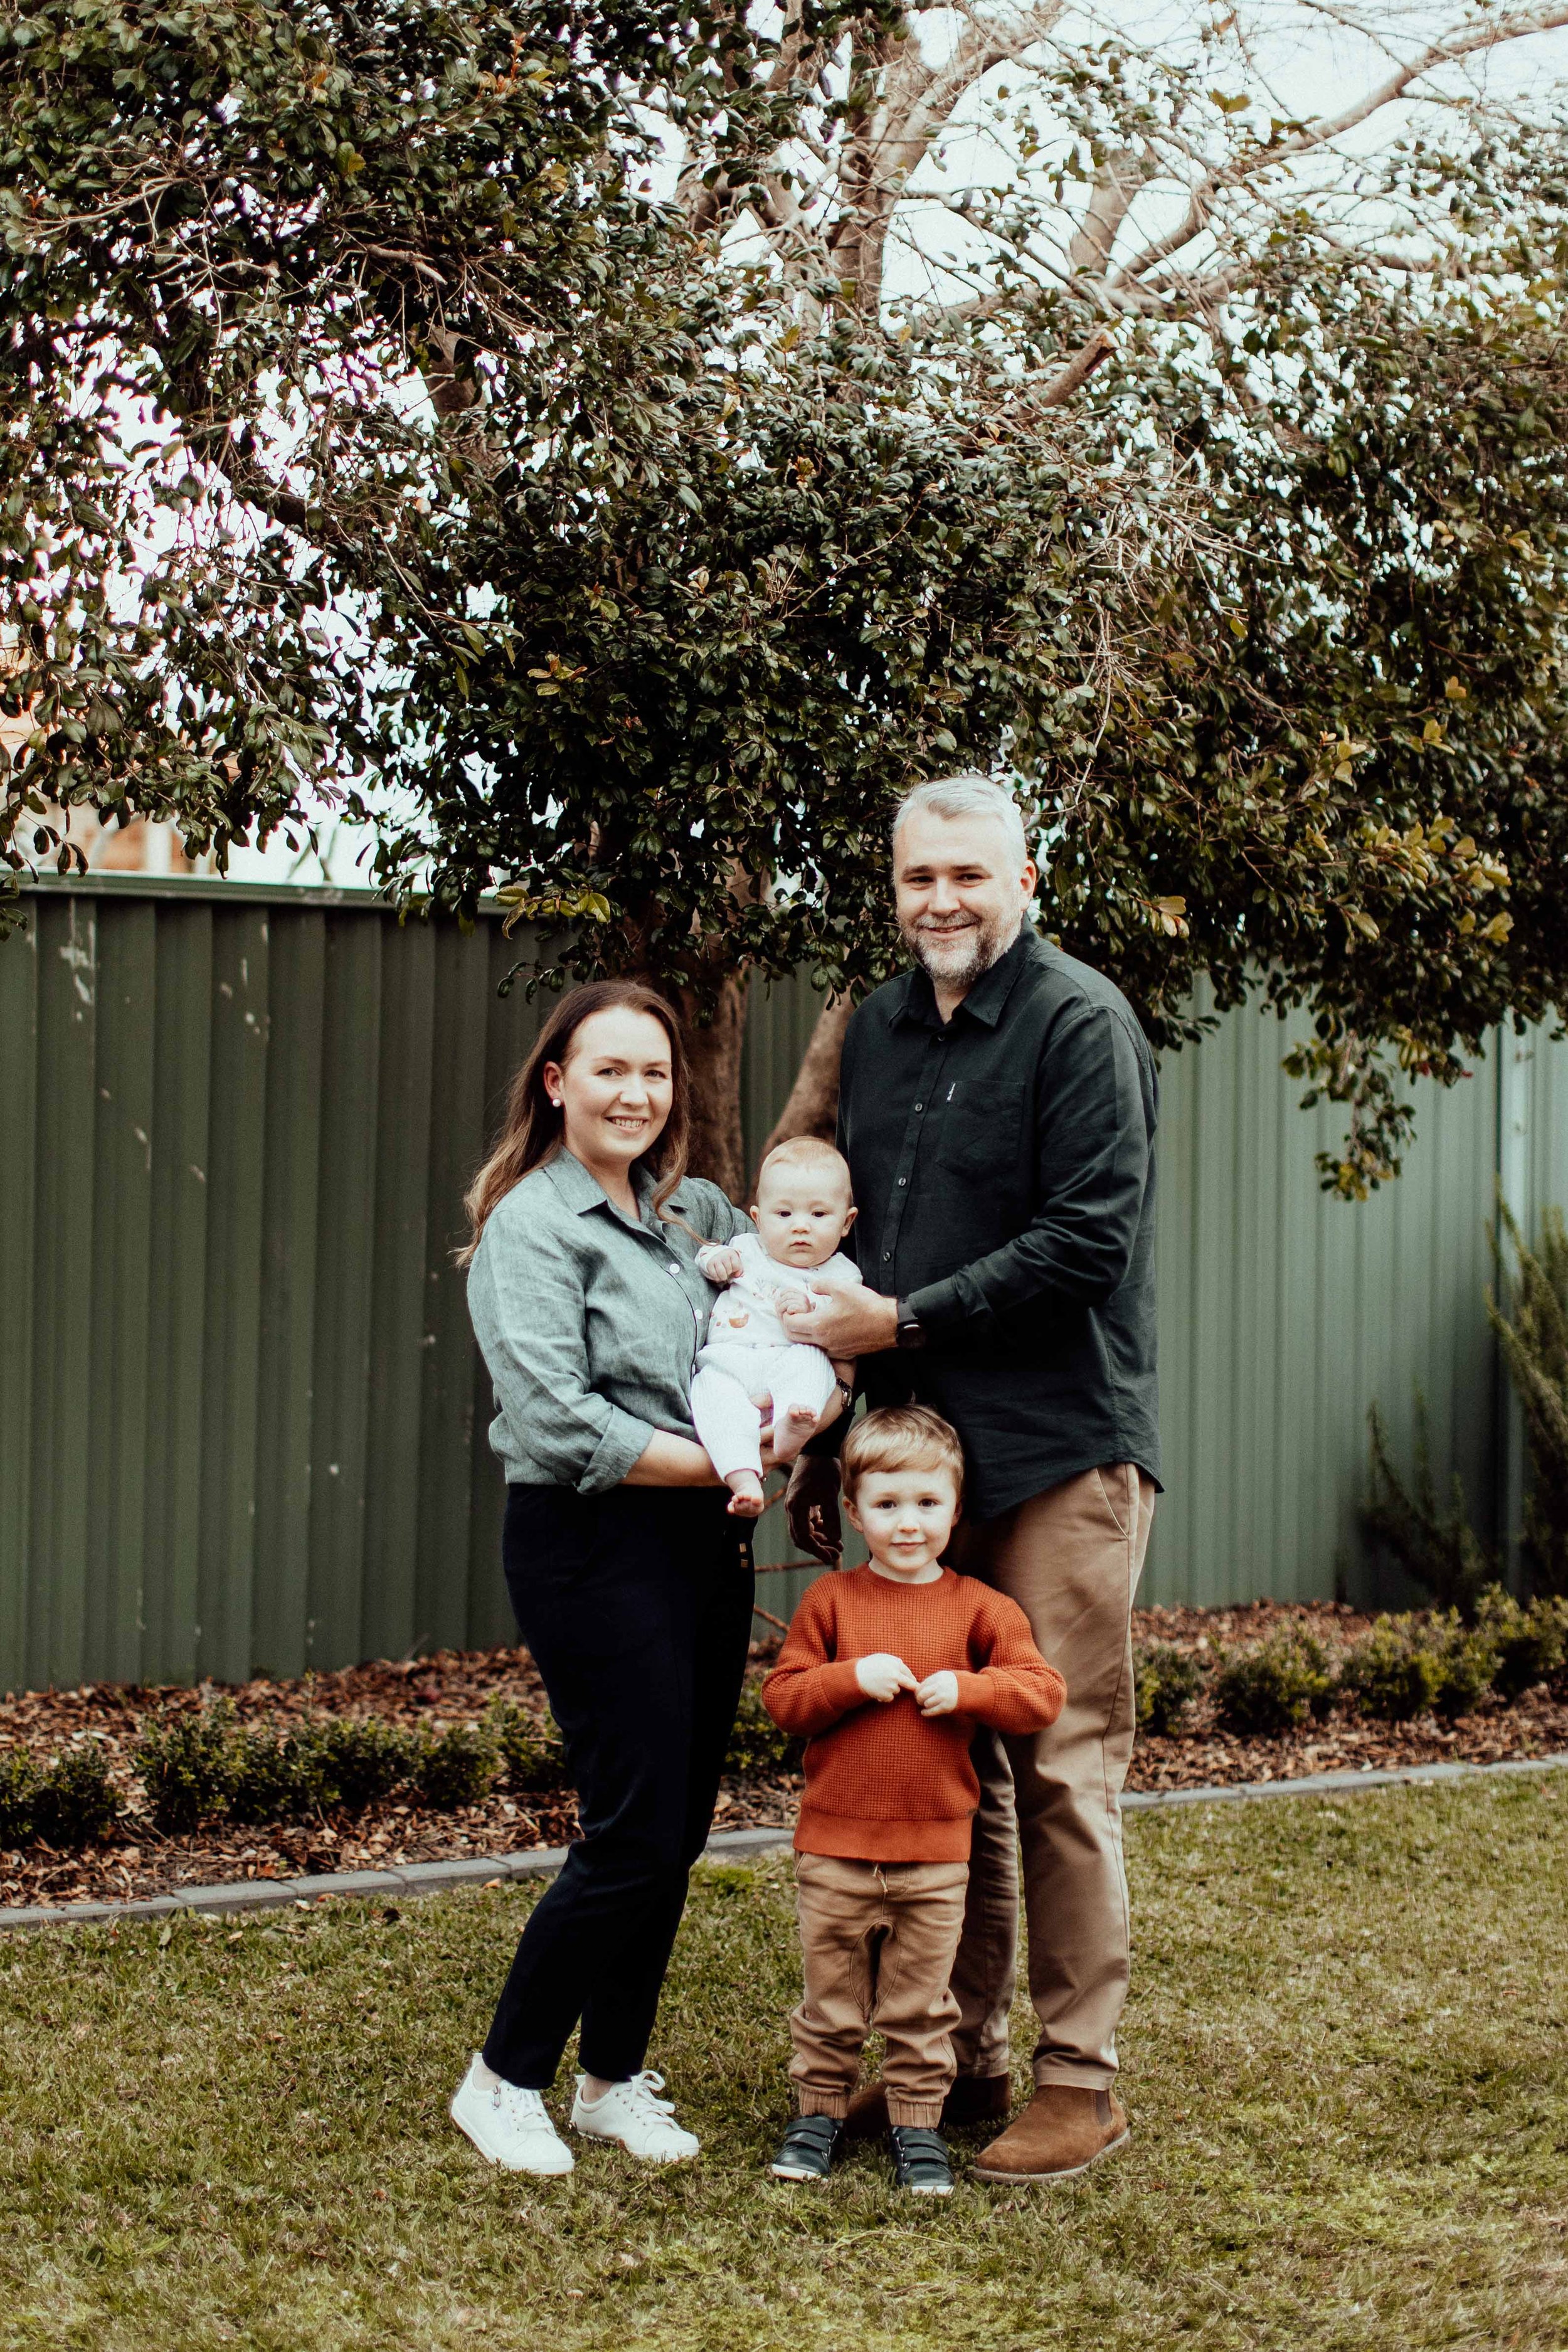 donnelly-family-inhome-family-lifestyle-wollondilly-camden-macarthur-sydney-photography-www.emilyobrienphotography.net-23.jpg